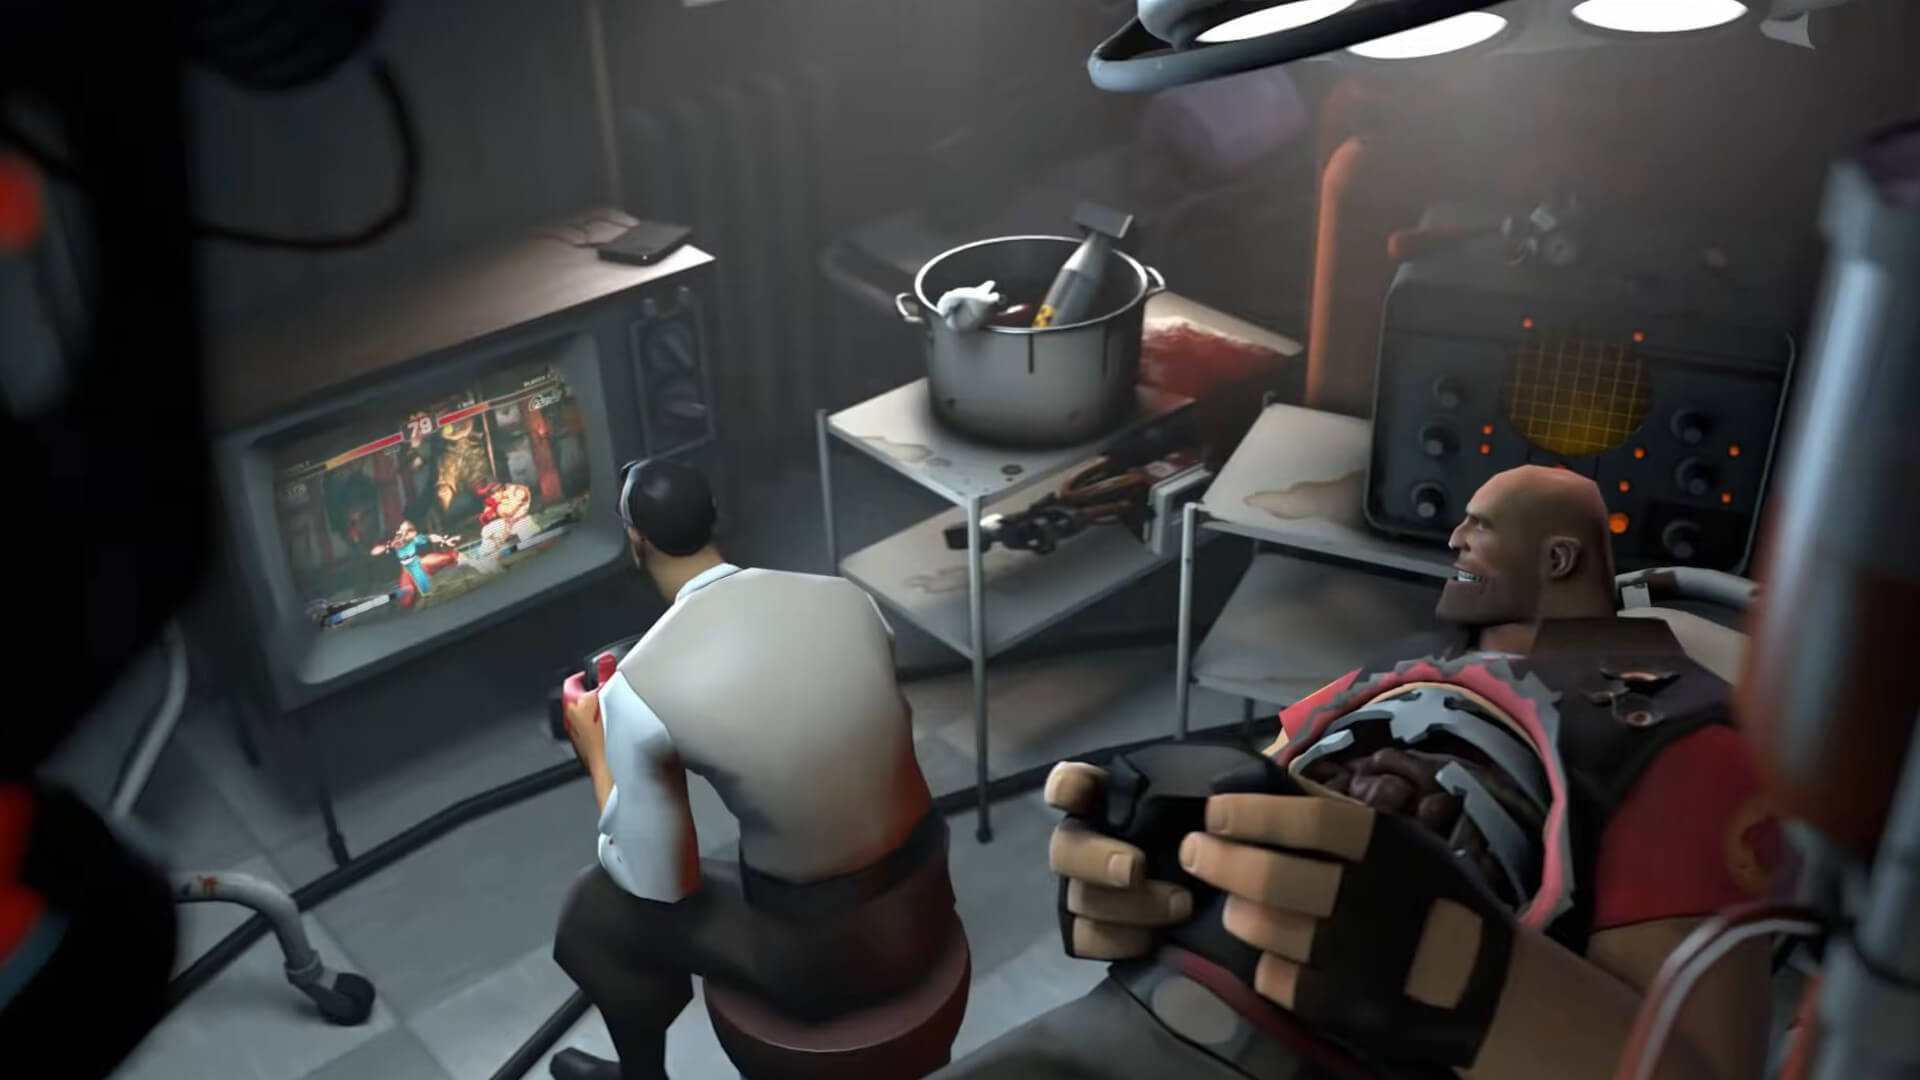 The Heavy and the Medic playing a game together on a Steam Link device to illustrate Steam Direct